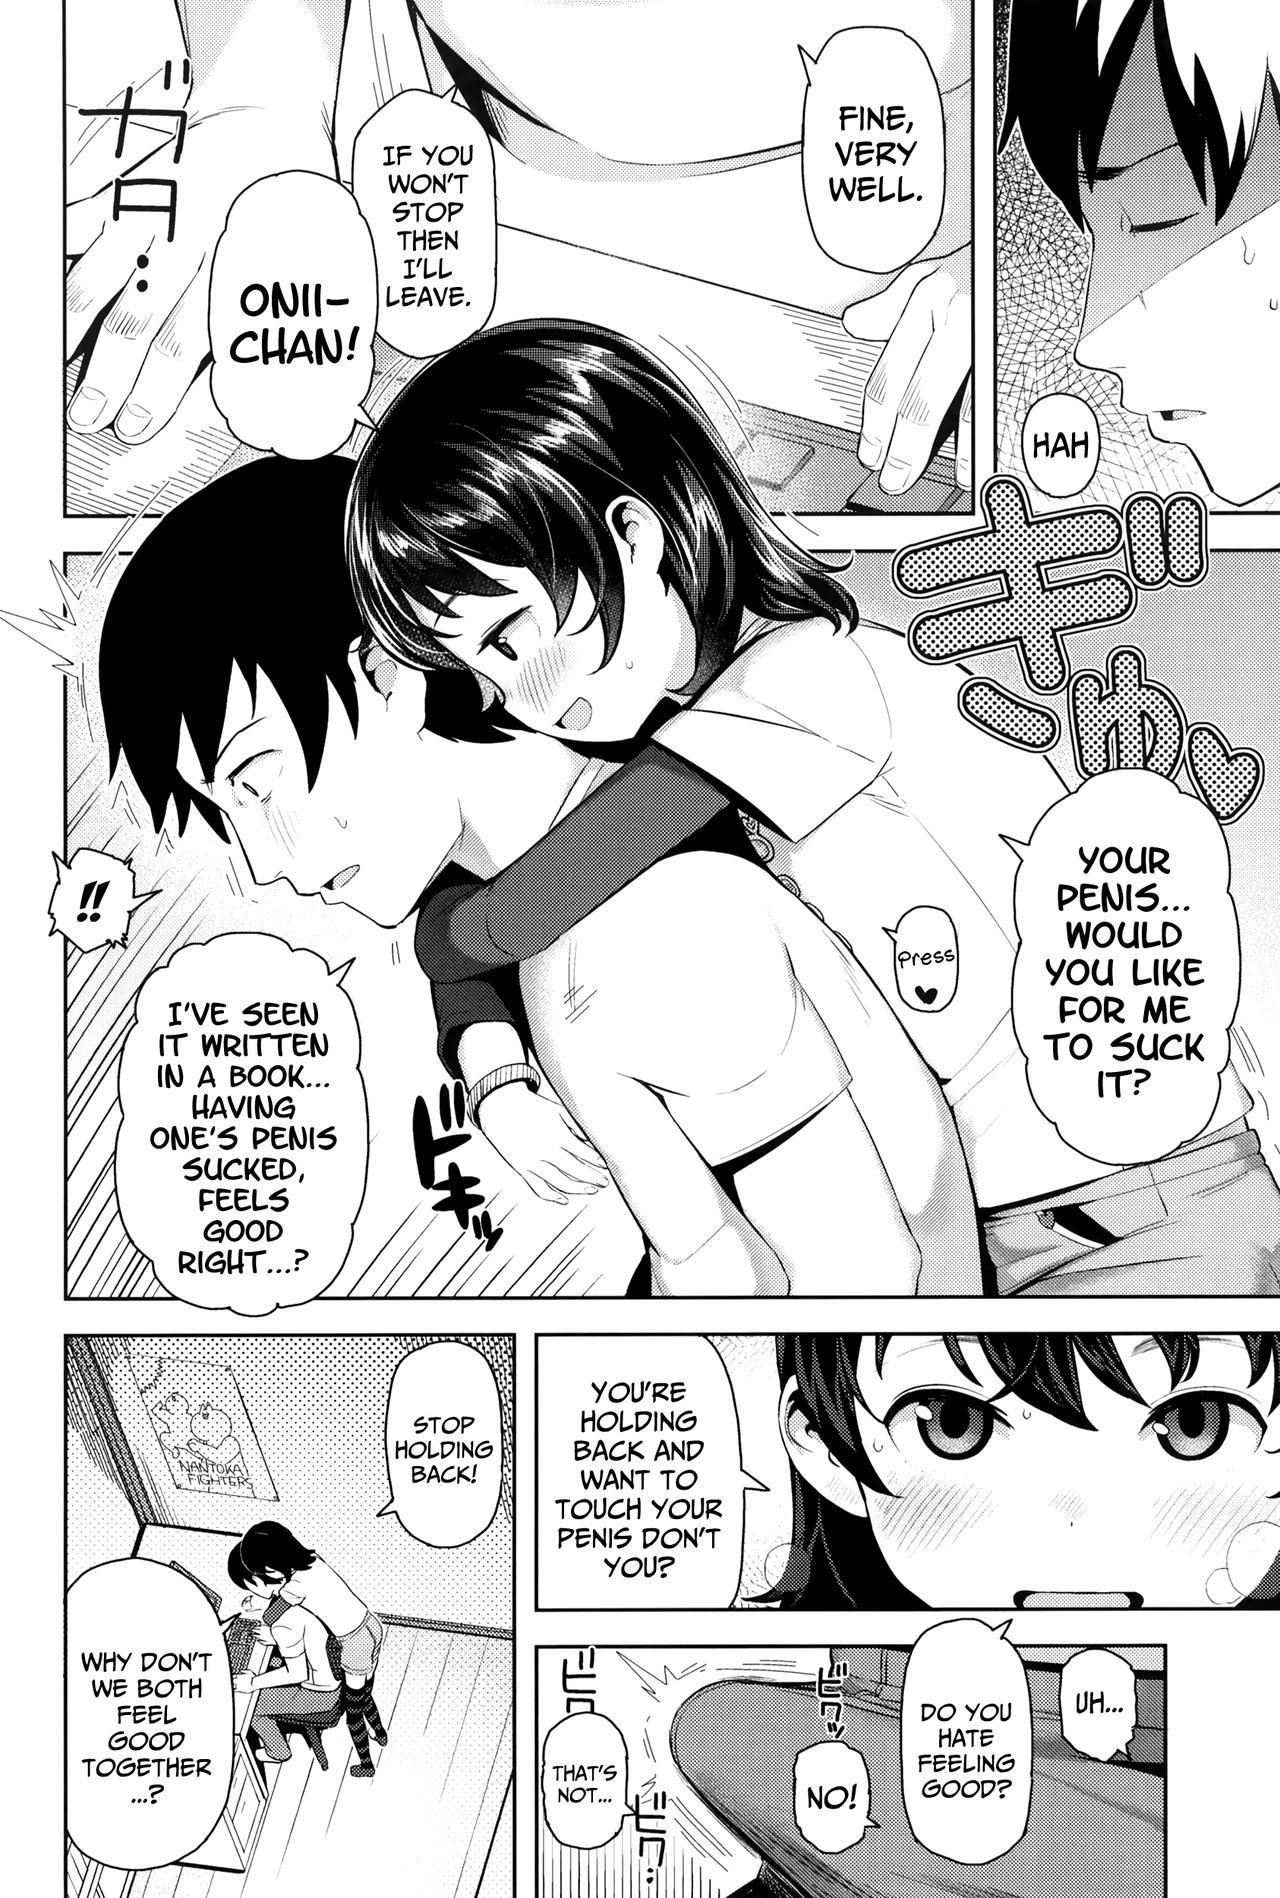 Spa Soba ni Itai no | I Wanna be by Your Side Teen - Page 6